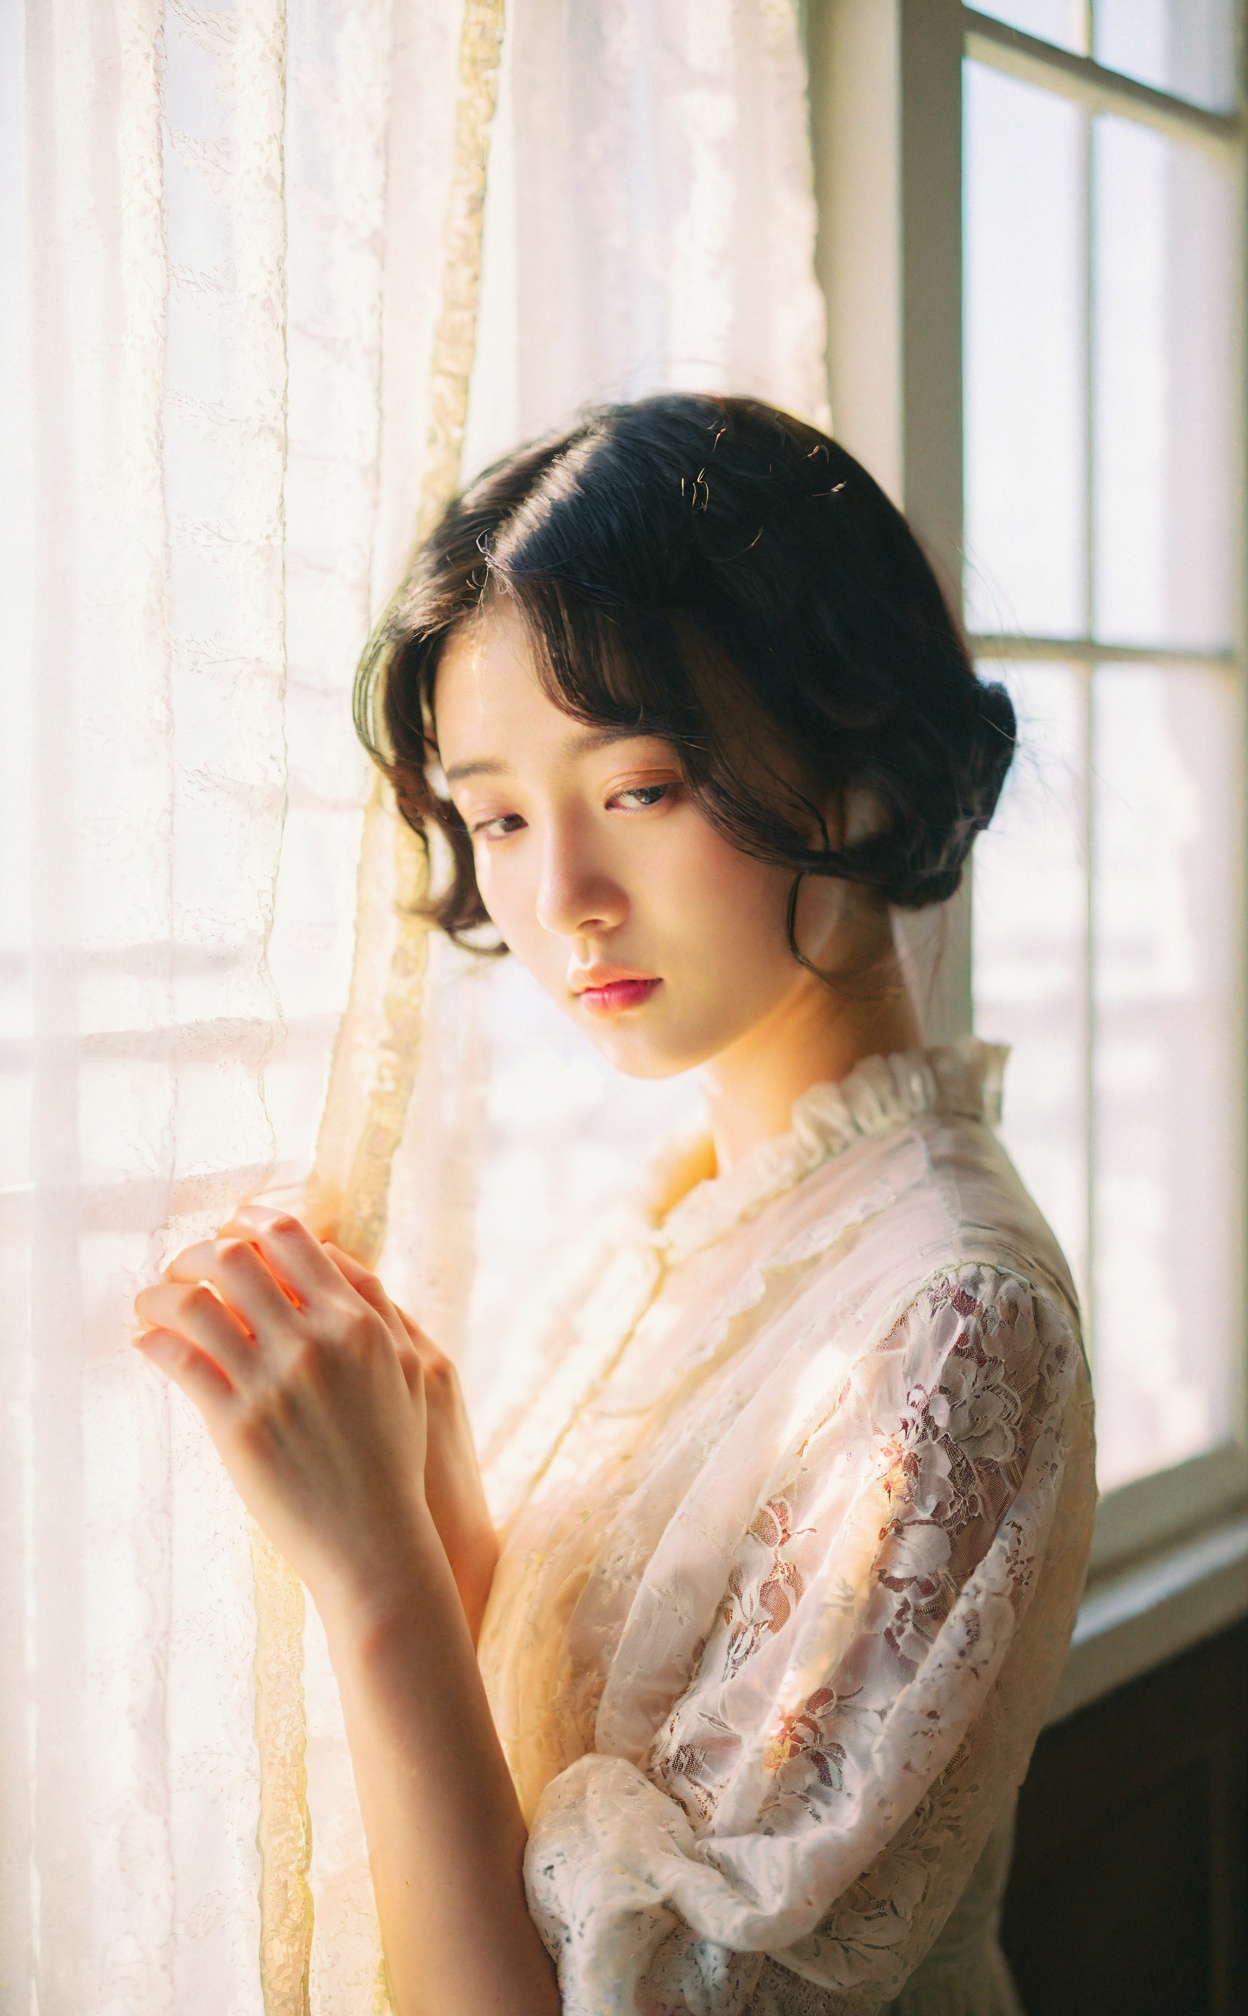 mugglelight, a vintage-inspired portrait of a lady by a window with lace curtains, 1girl, solo, window light, lace, curtains, vintage, thoughtful, daydreaming, book in hand, soft focuskorean girl,black hair,